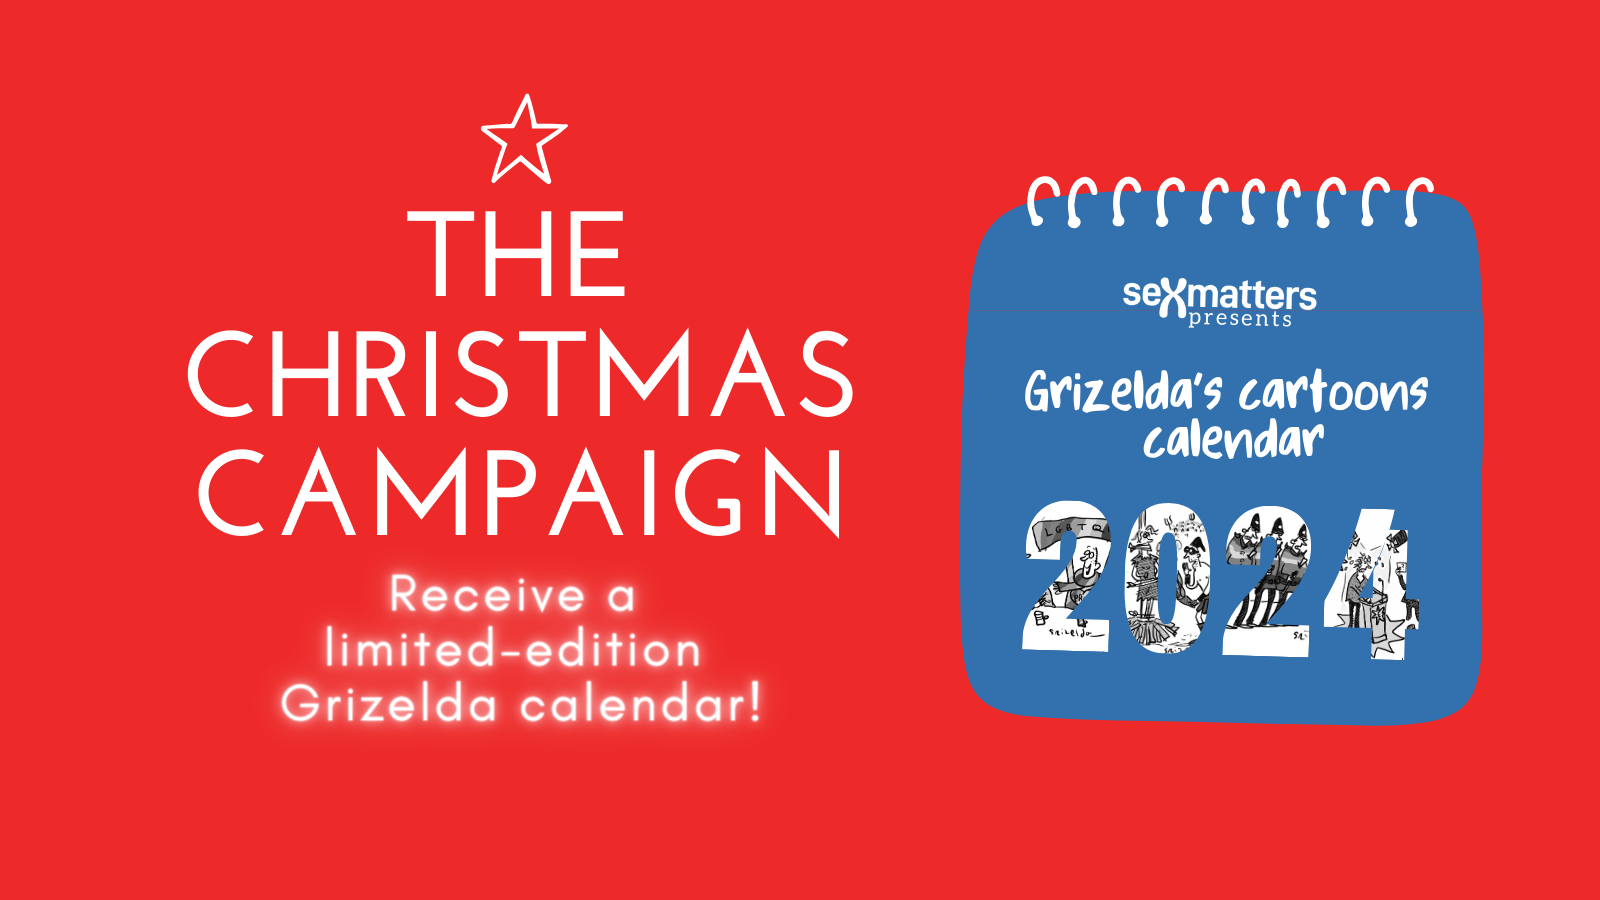 The Christmas campaign: receive a limited-edition Grizelda calendar!